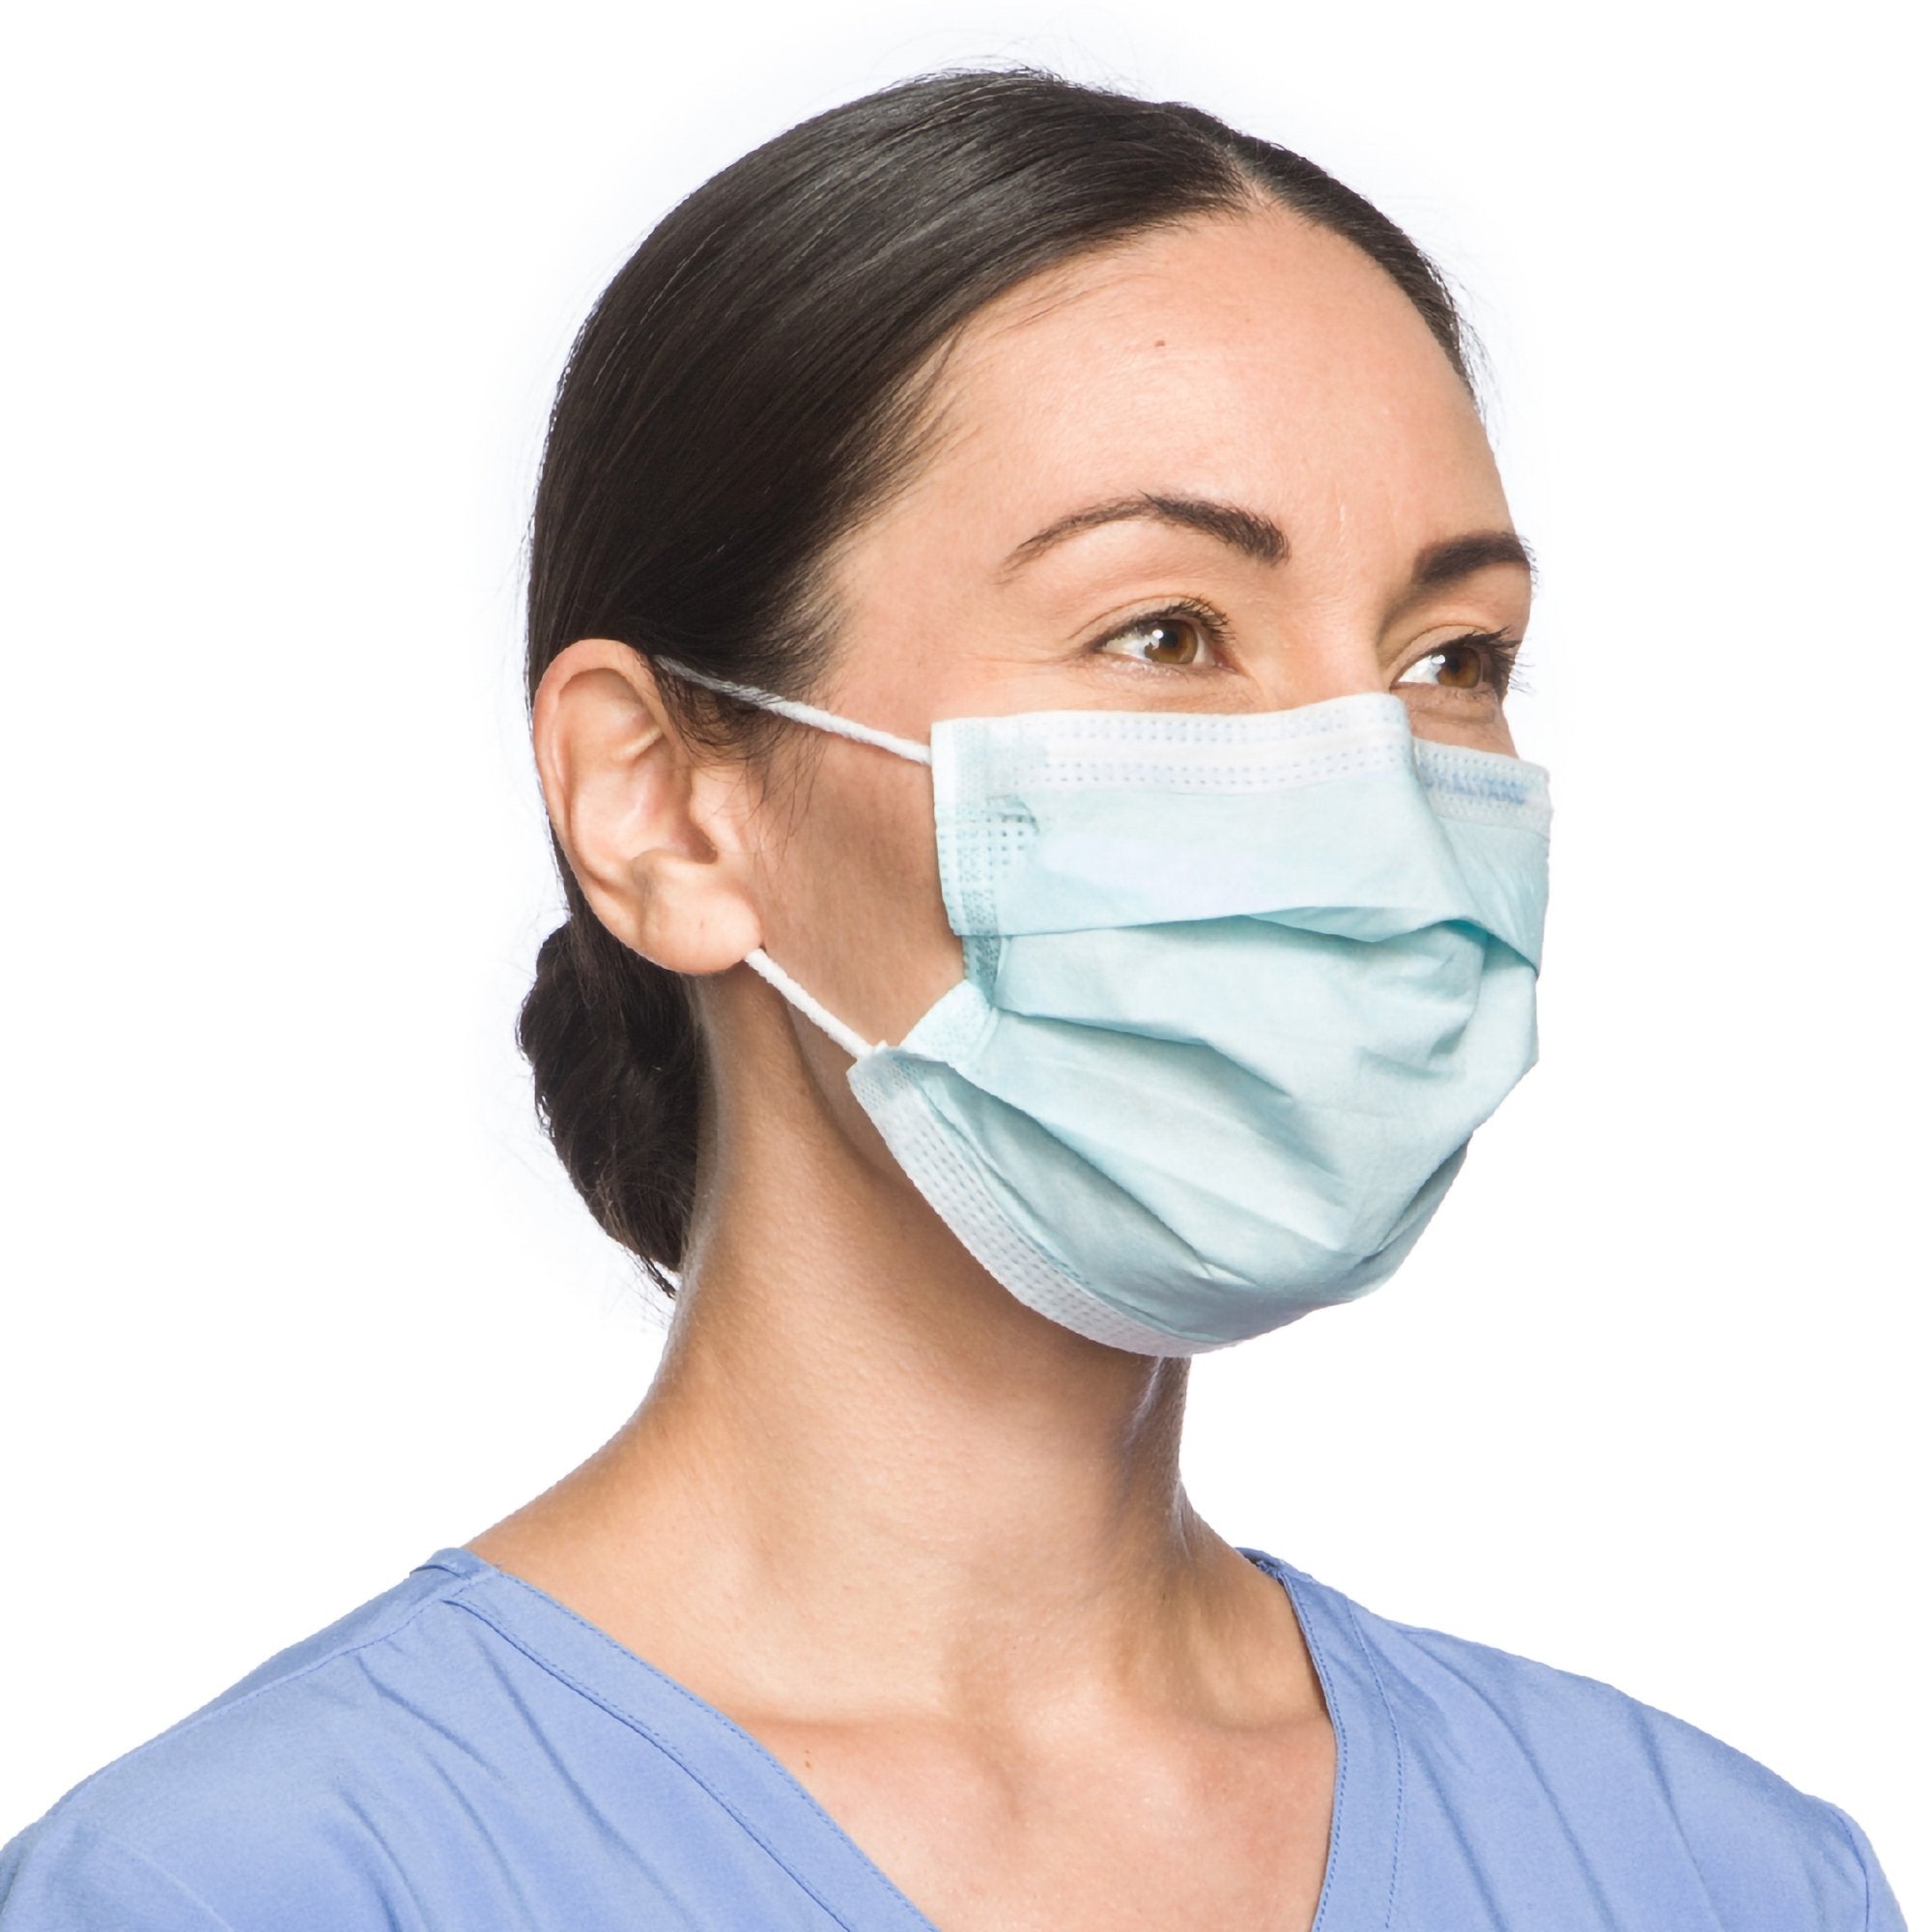 Procedure Mask Halyard Pleated Earloops One Size Fits Most Blue NonSterile Not Rated Adult